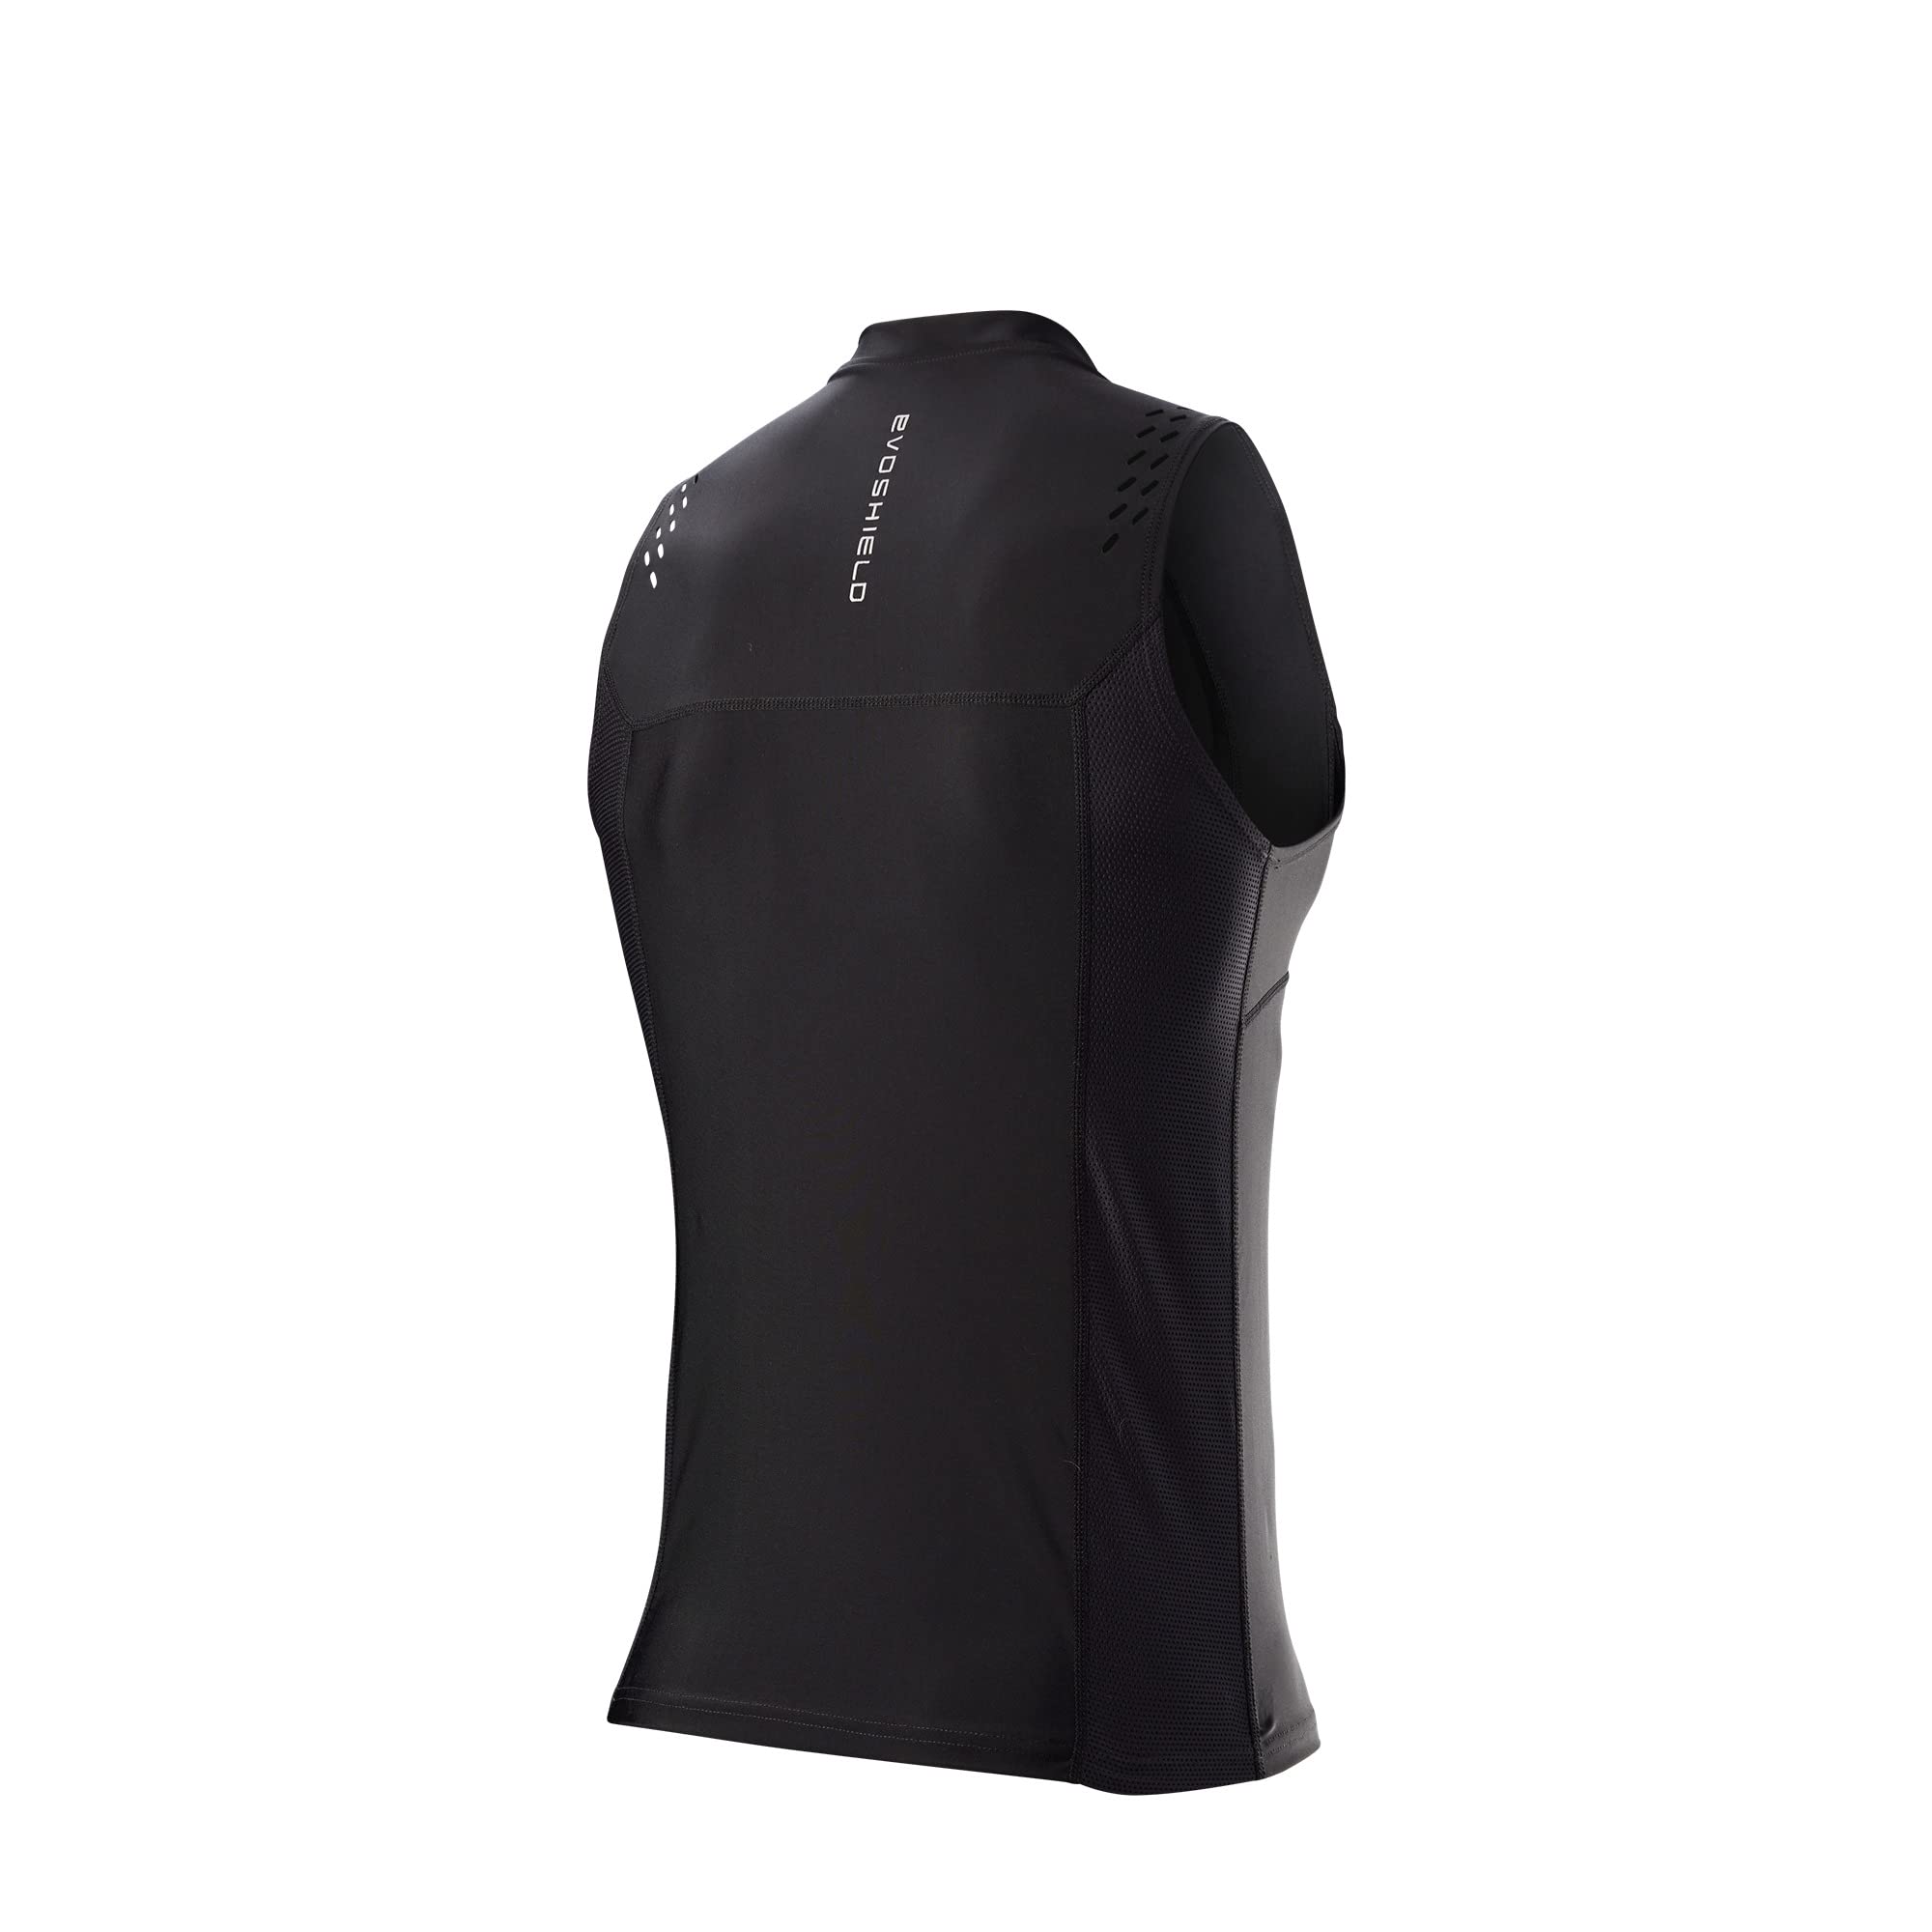 EvoShield NOCSAE® Protective Chest Guard Shirt - Adult and Youth Sizes, Black